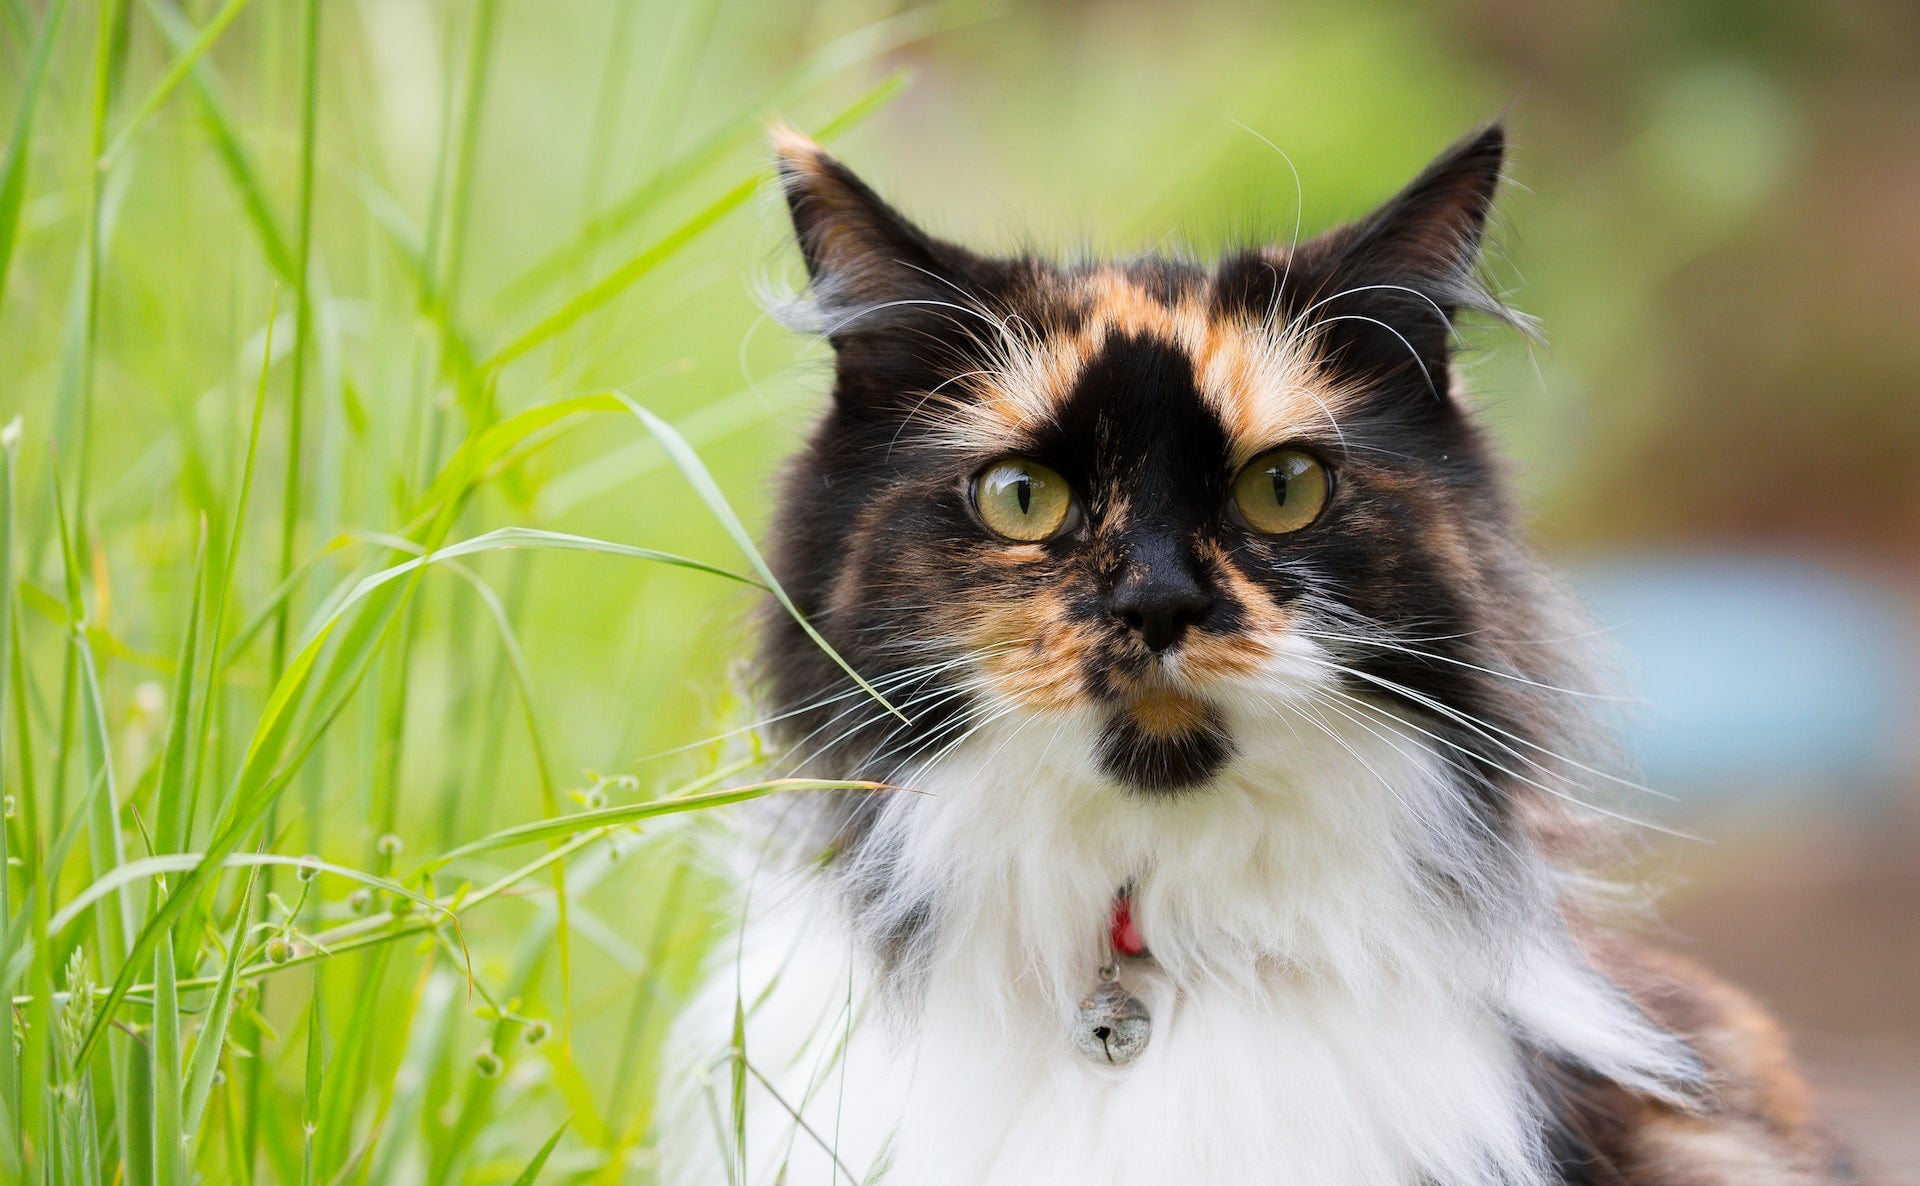 Pet cat outdoors in the grass wearing a collar